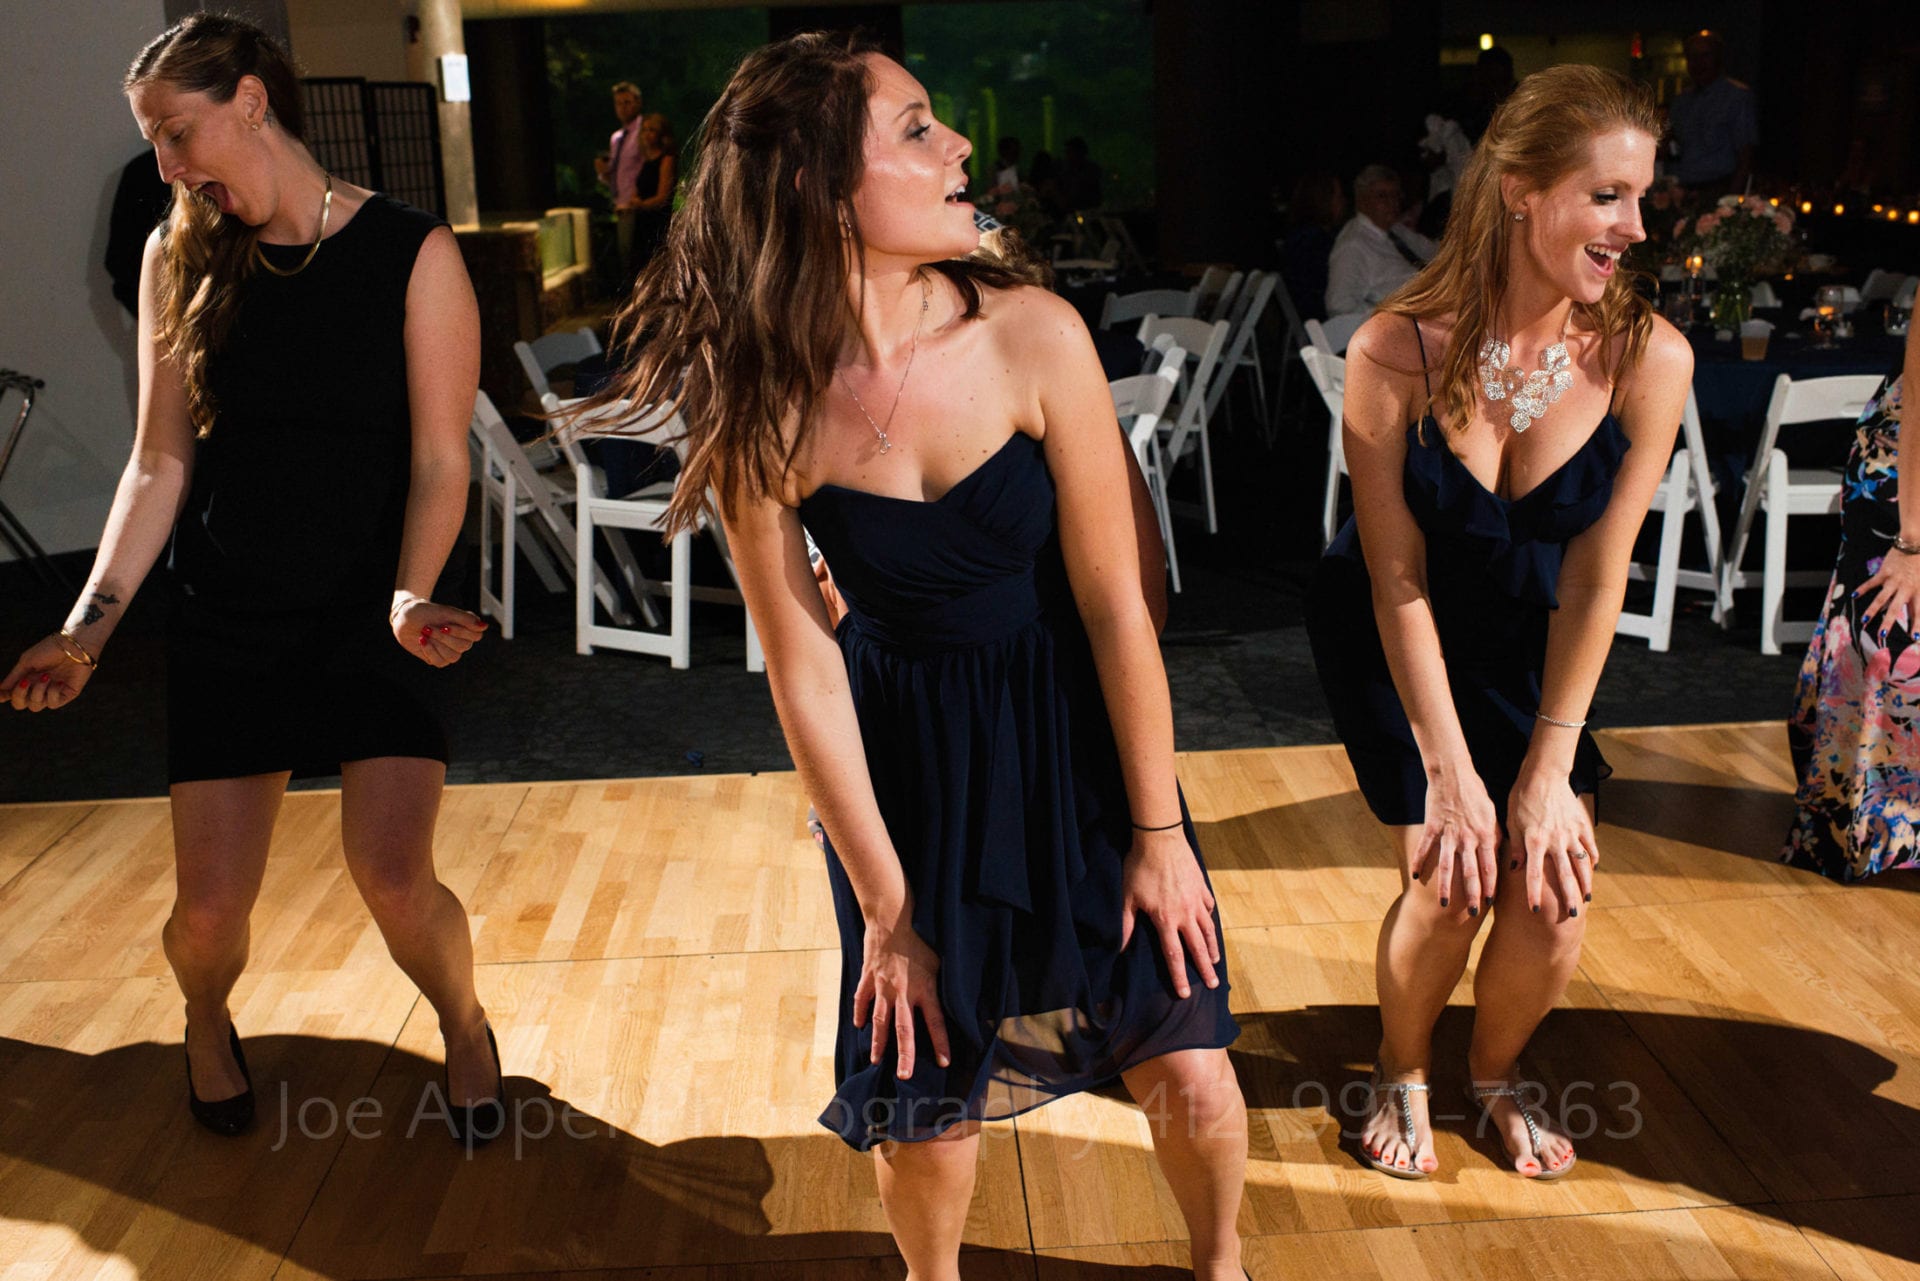 Three women dance with their hands on their knees during a PPG Aquarium wedding reception.